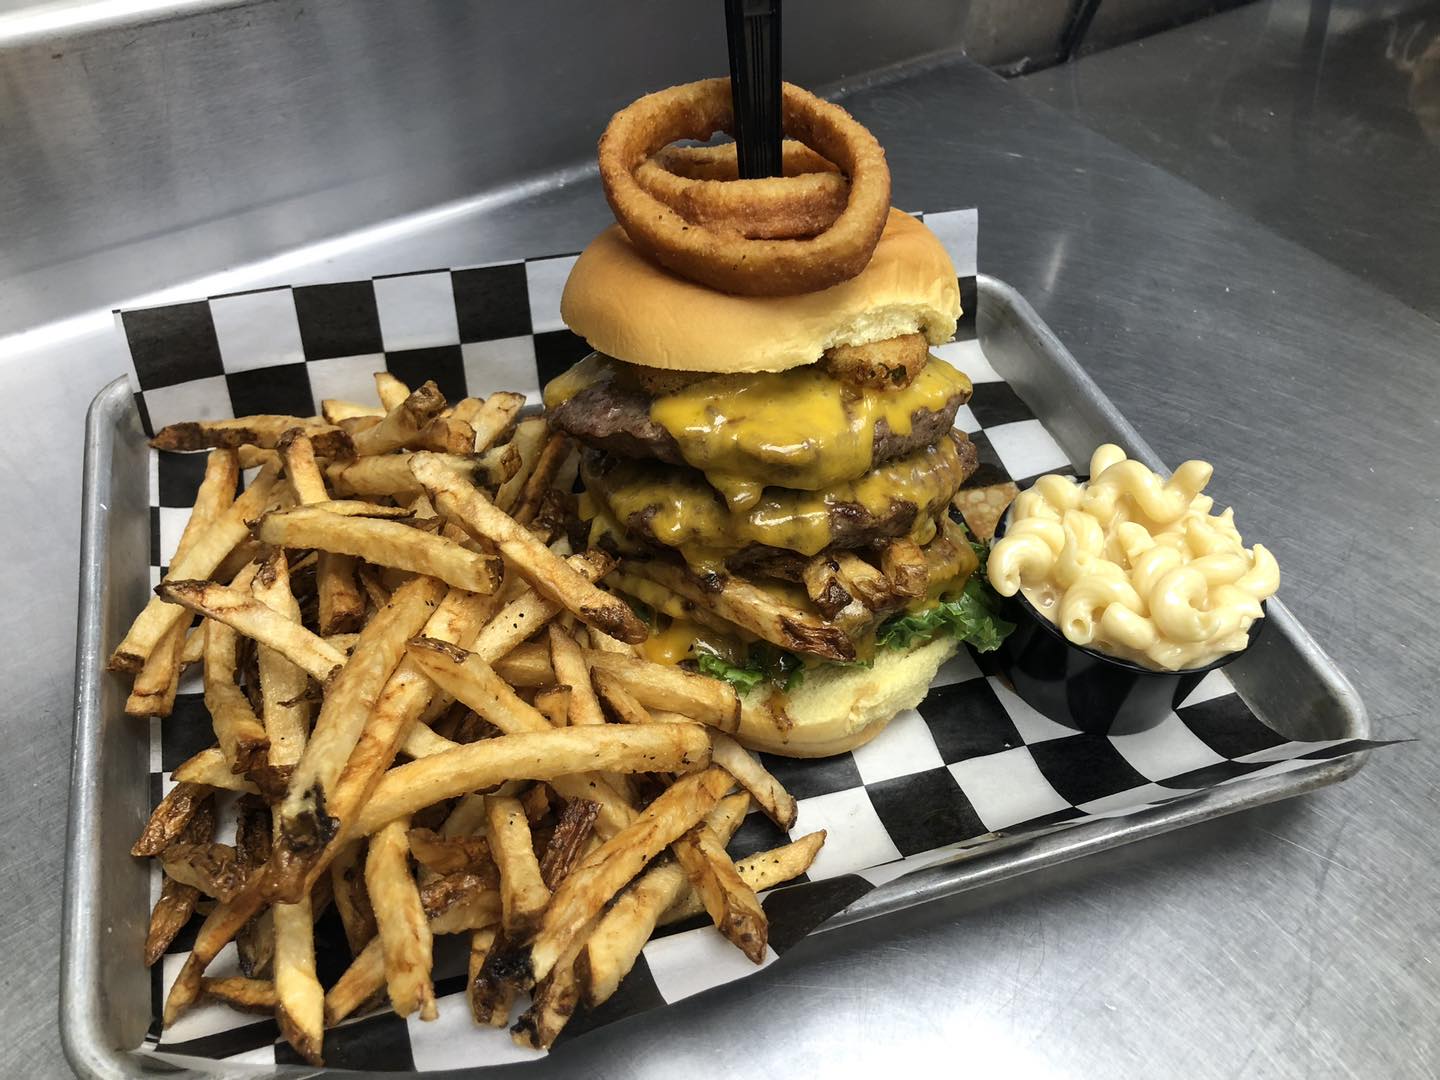 a burger with fries and mac & cheese